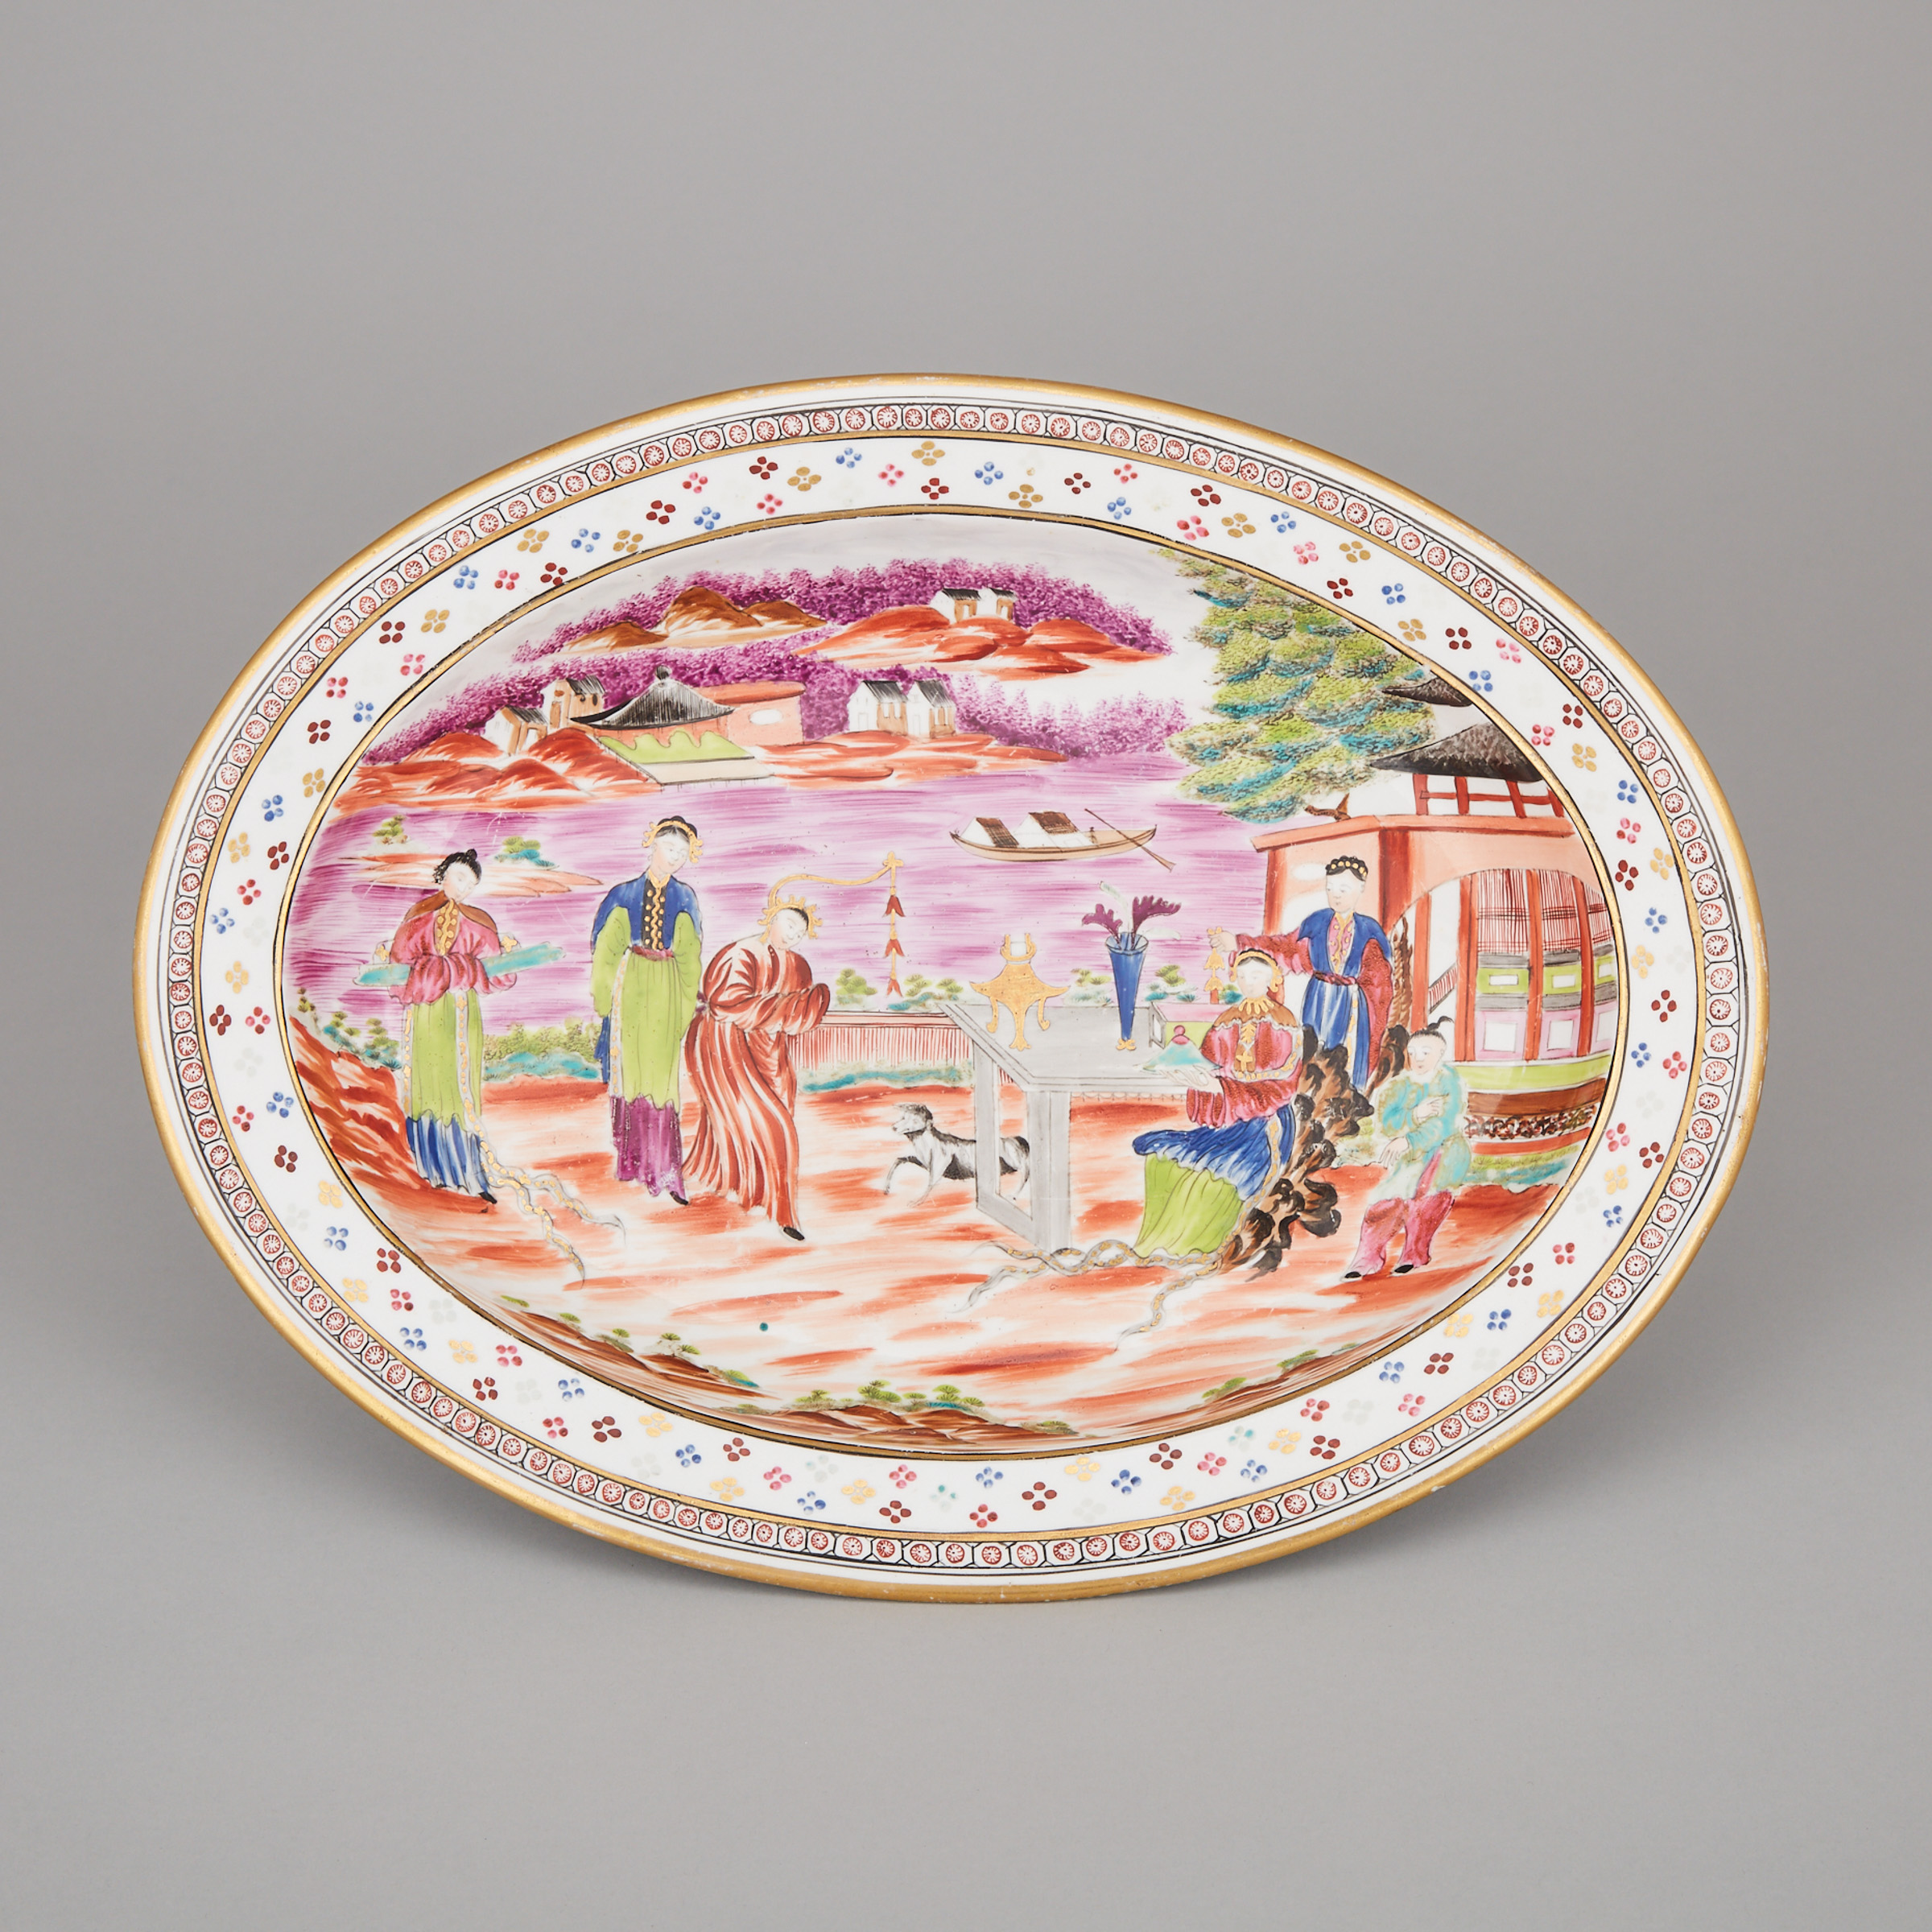 English Porcelain Oval Dish, possibly Miles Mason, early 19th century